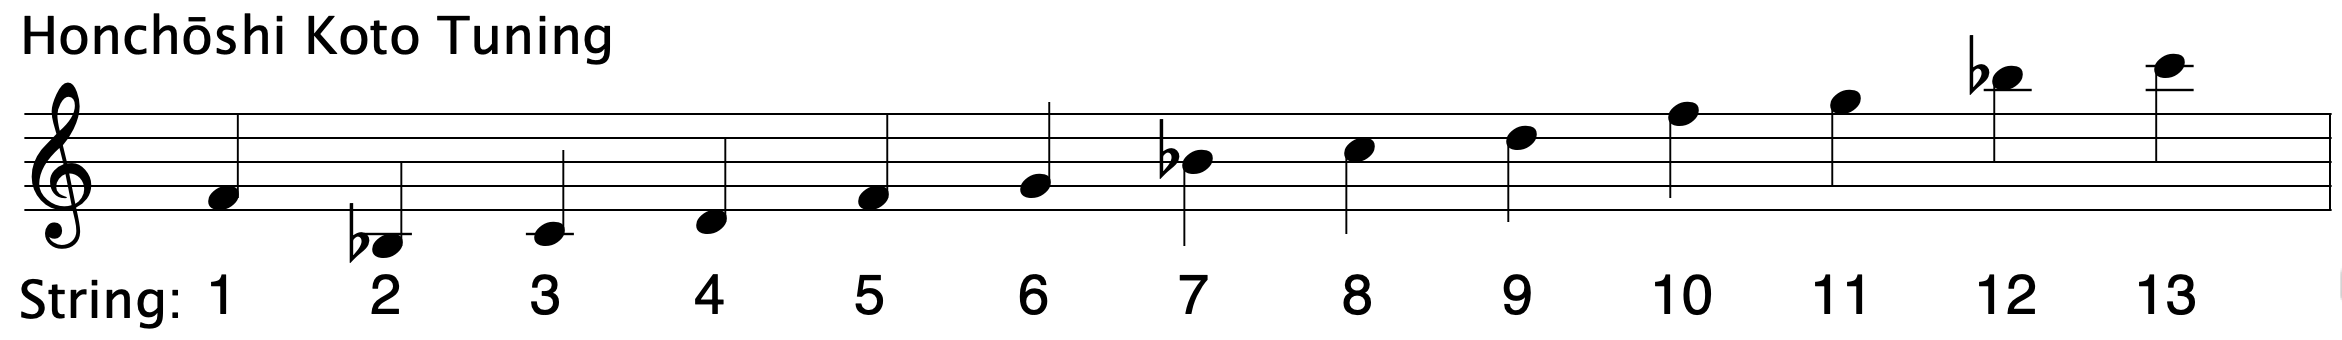  Honchōshi Koto Tuning ranging from B3b to C6 with D5, No A's 